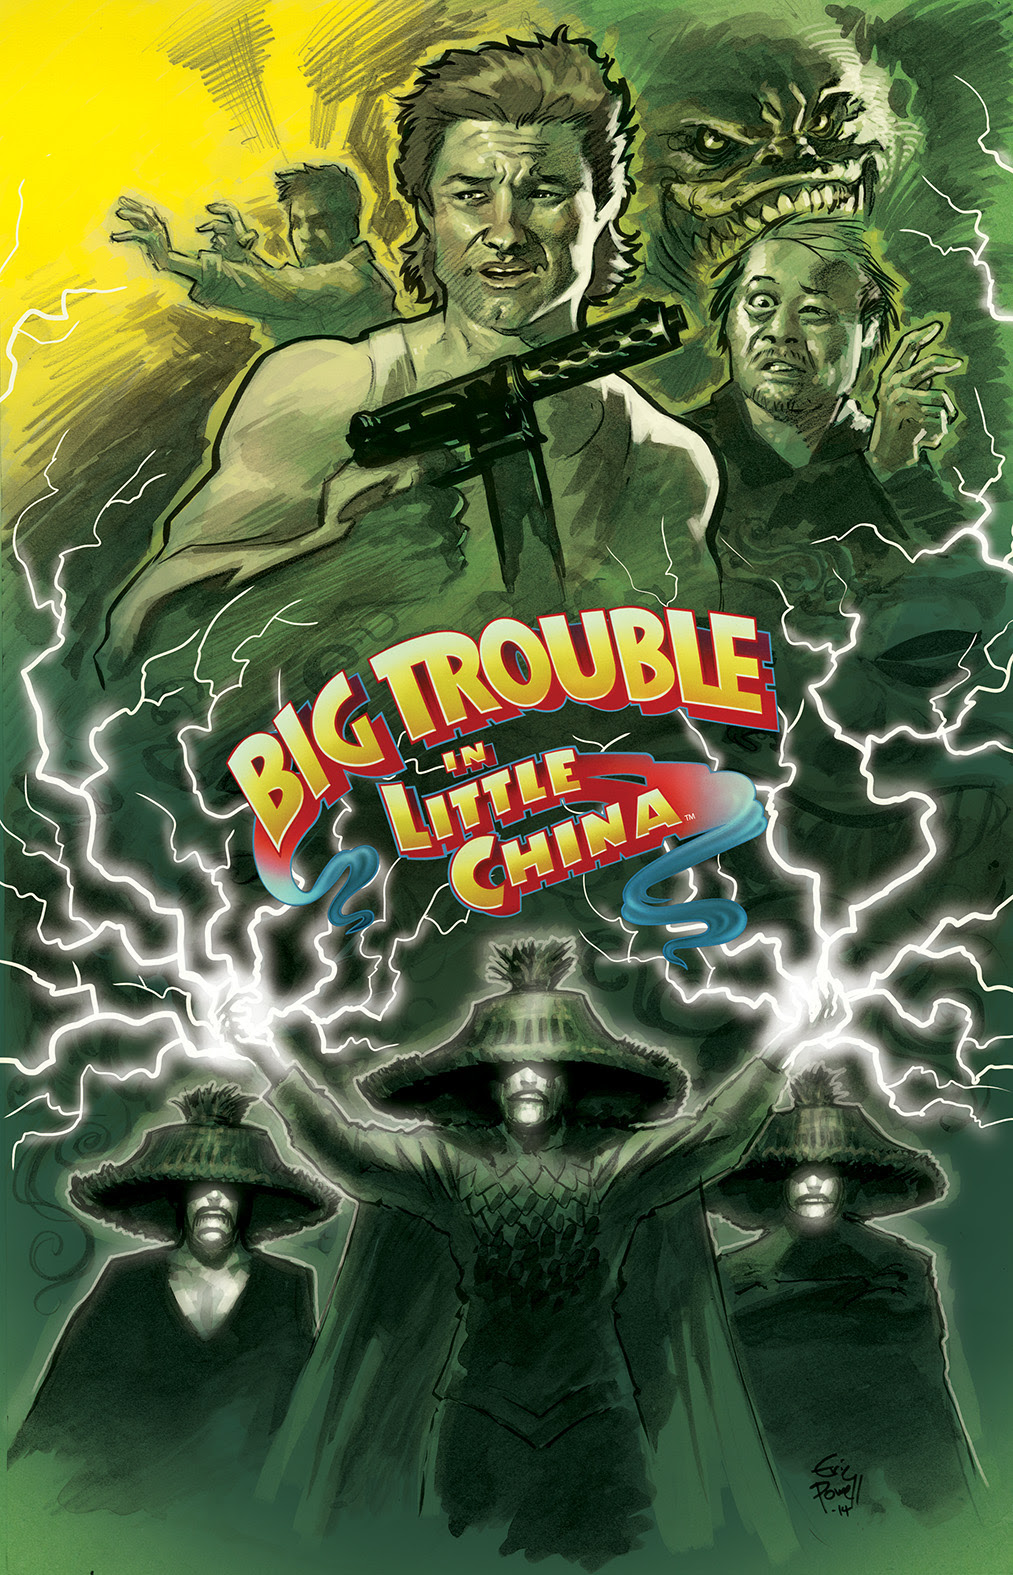 BIG TROUBLE IN LITTLE CHINA #4 Cover A by Eric Powell